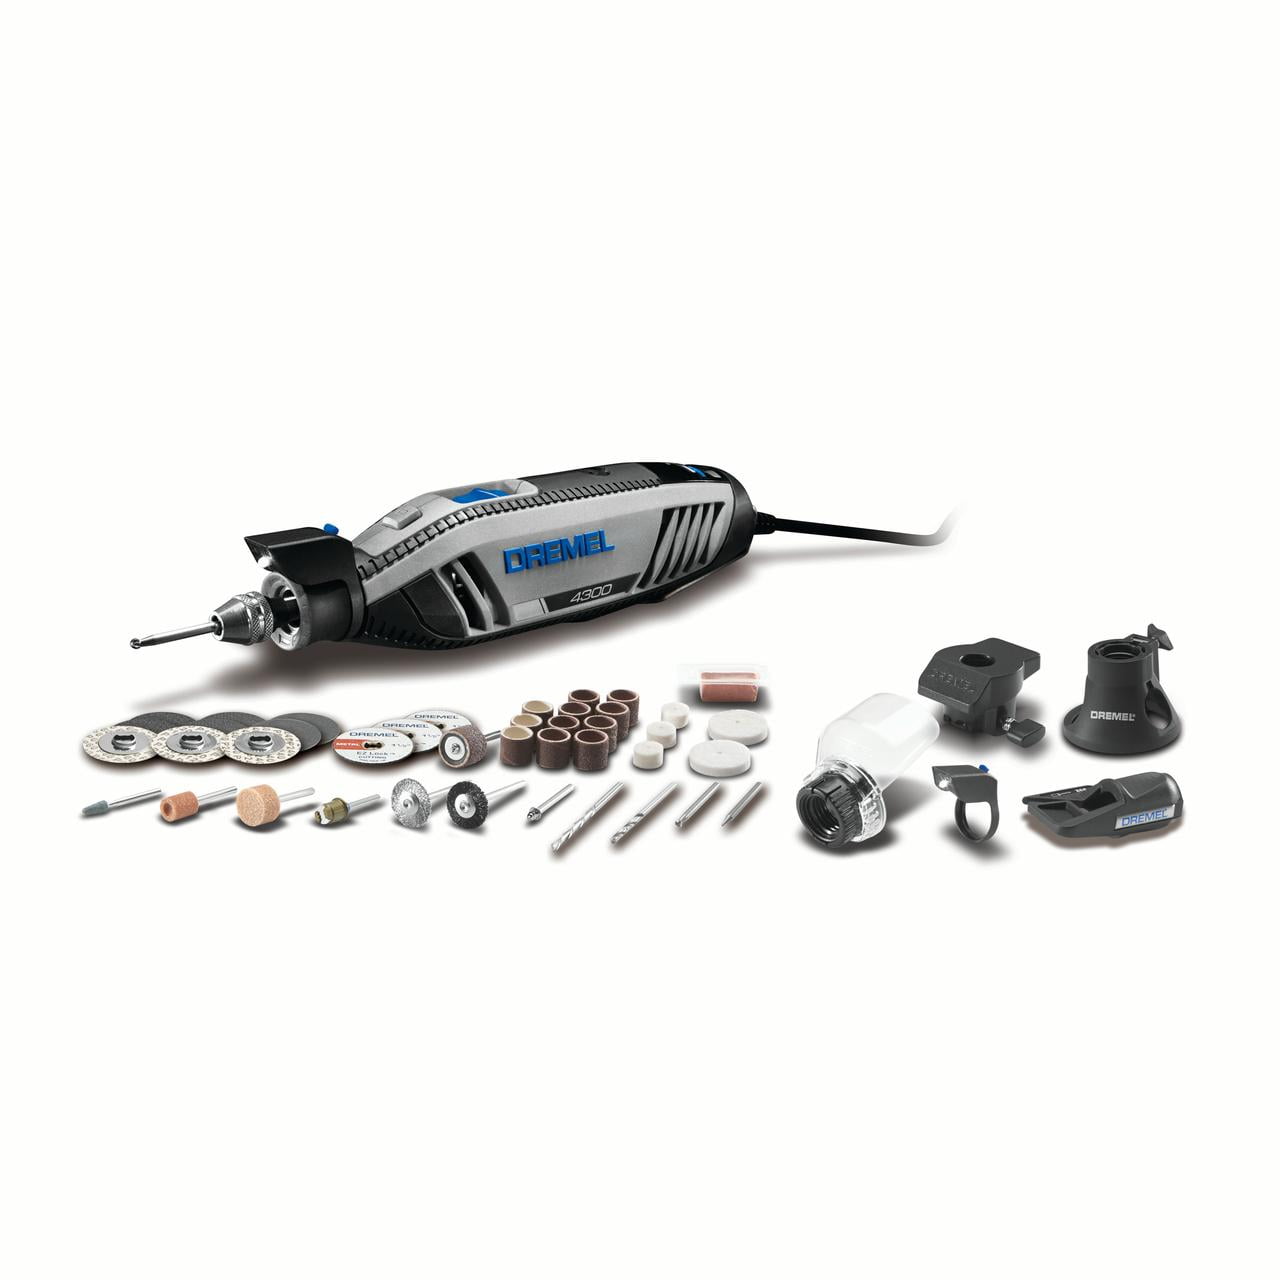 Dremel 4000-6/50 Rotary Tool Kit with Attachments and Carrying